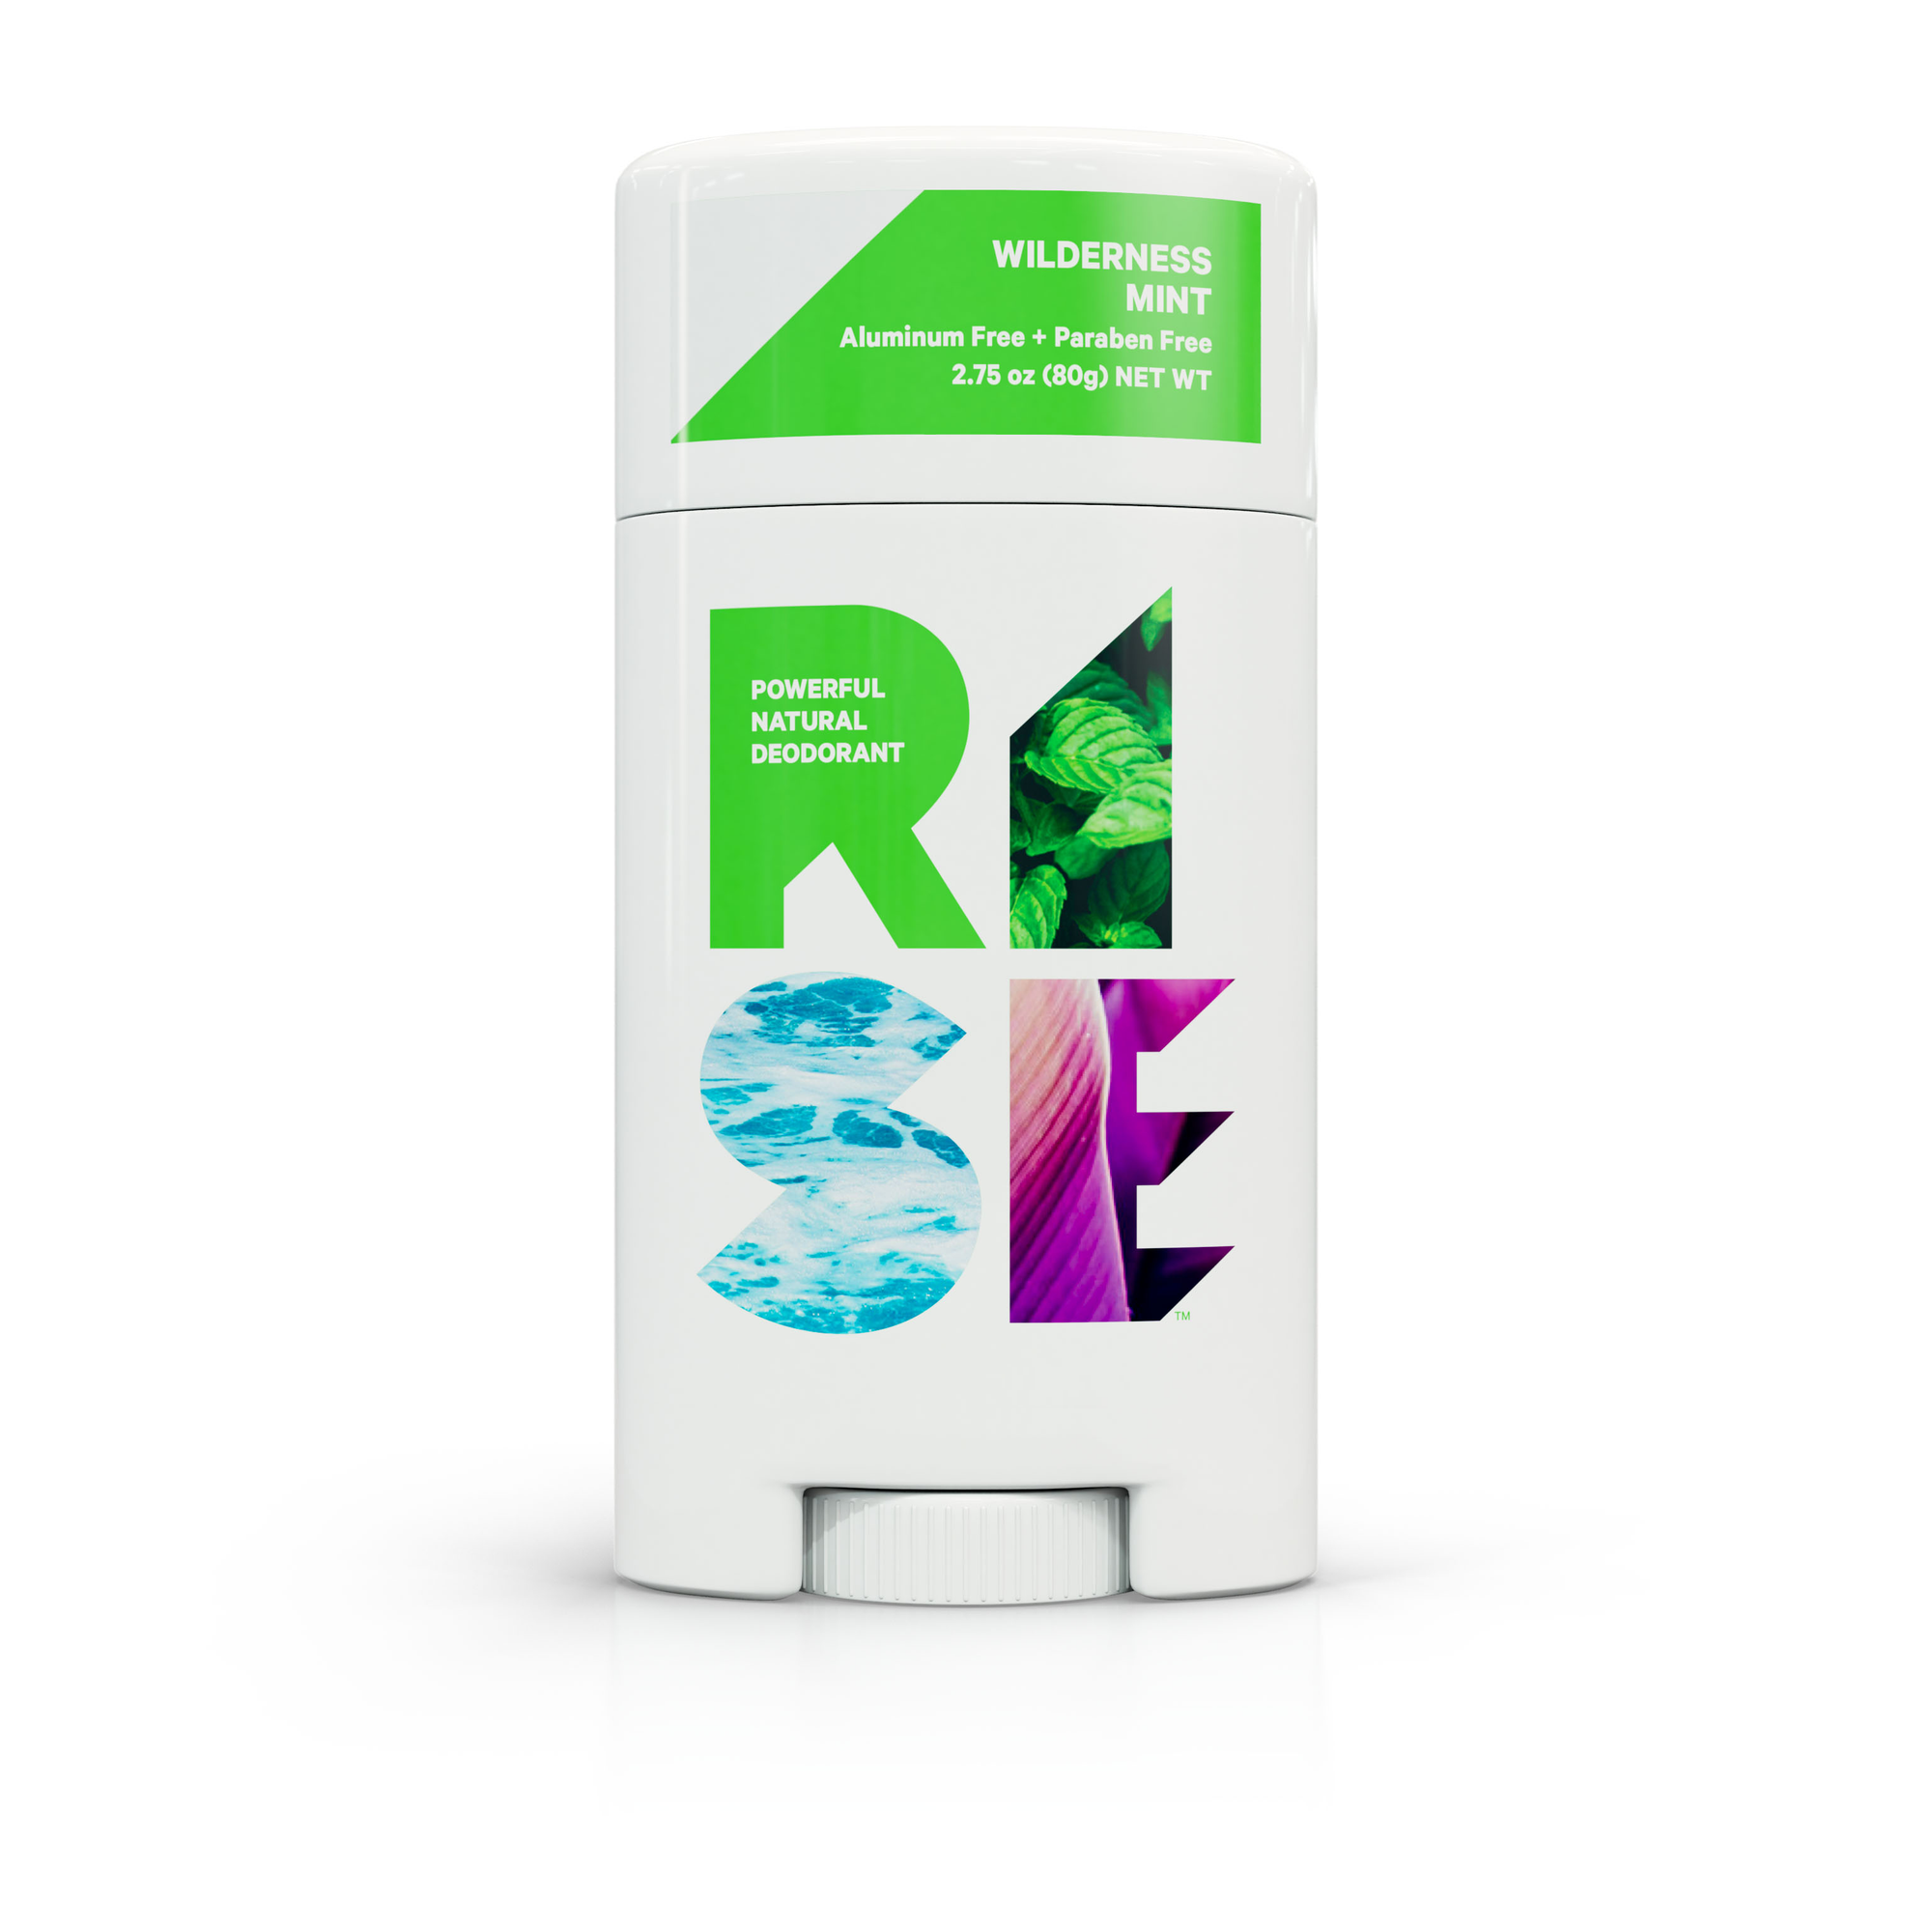 RISE - Powerful Nature Deodorant Variety Pack - All Scents (5 Rise Sticks)